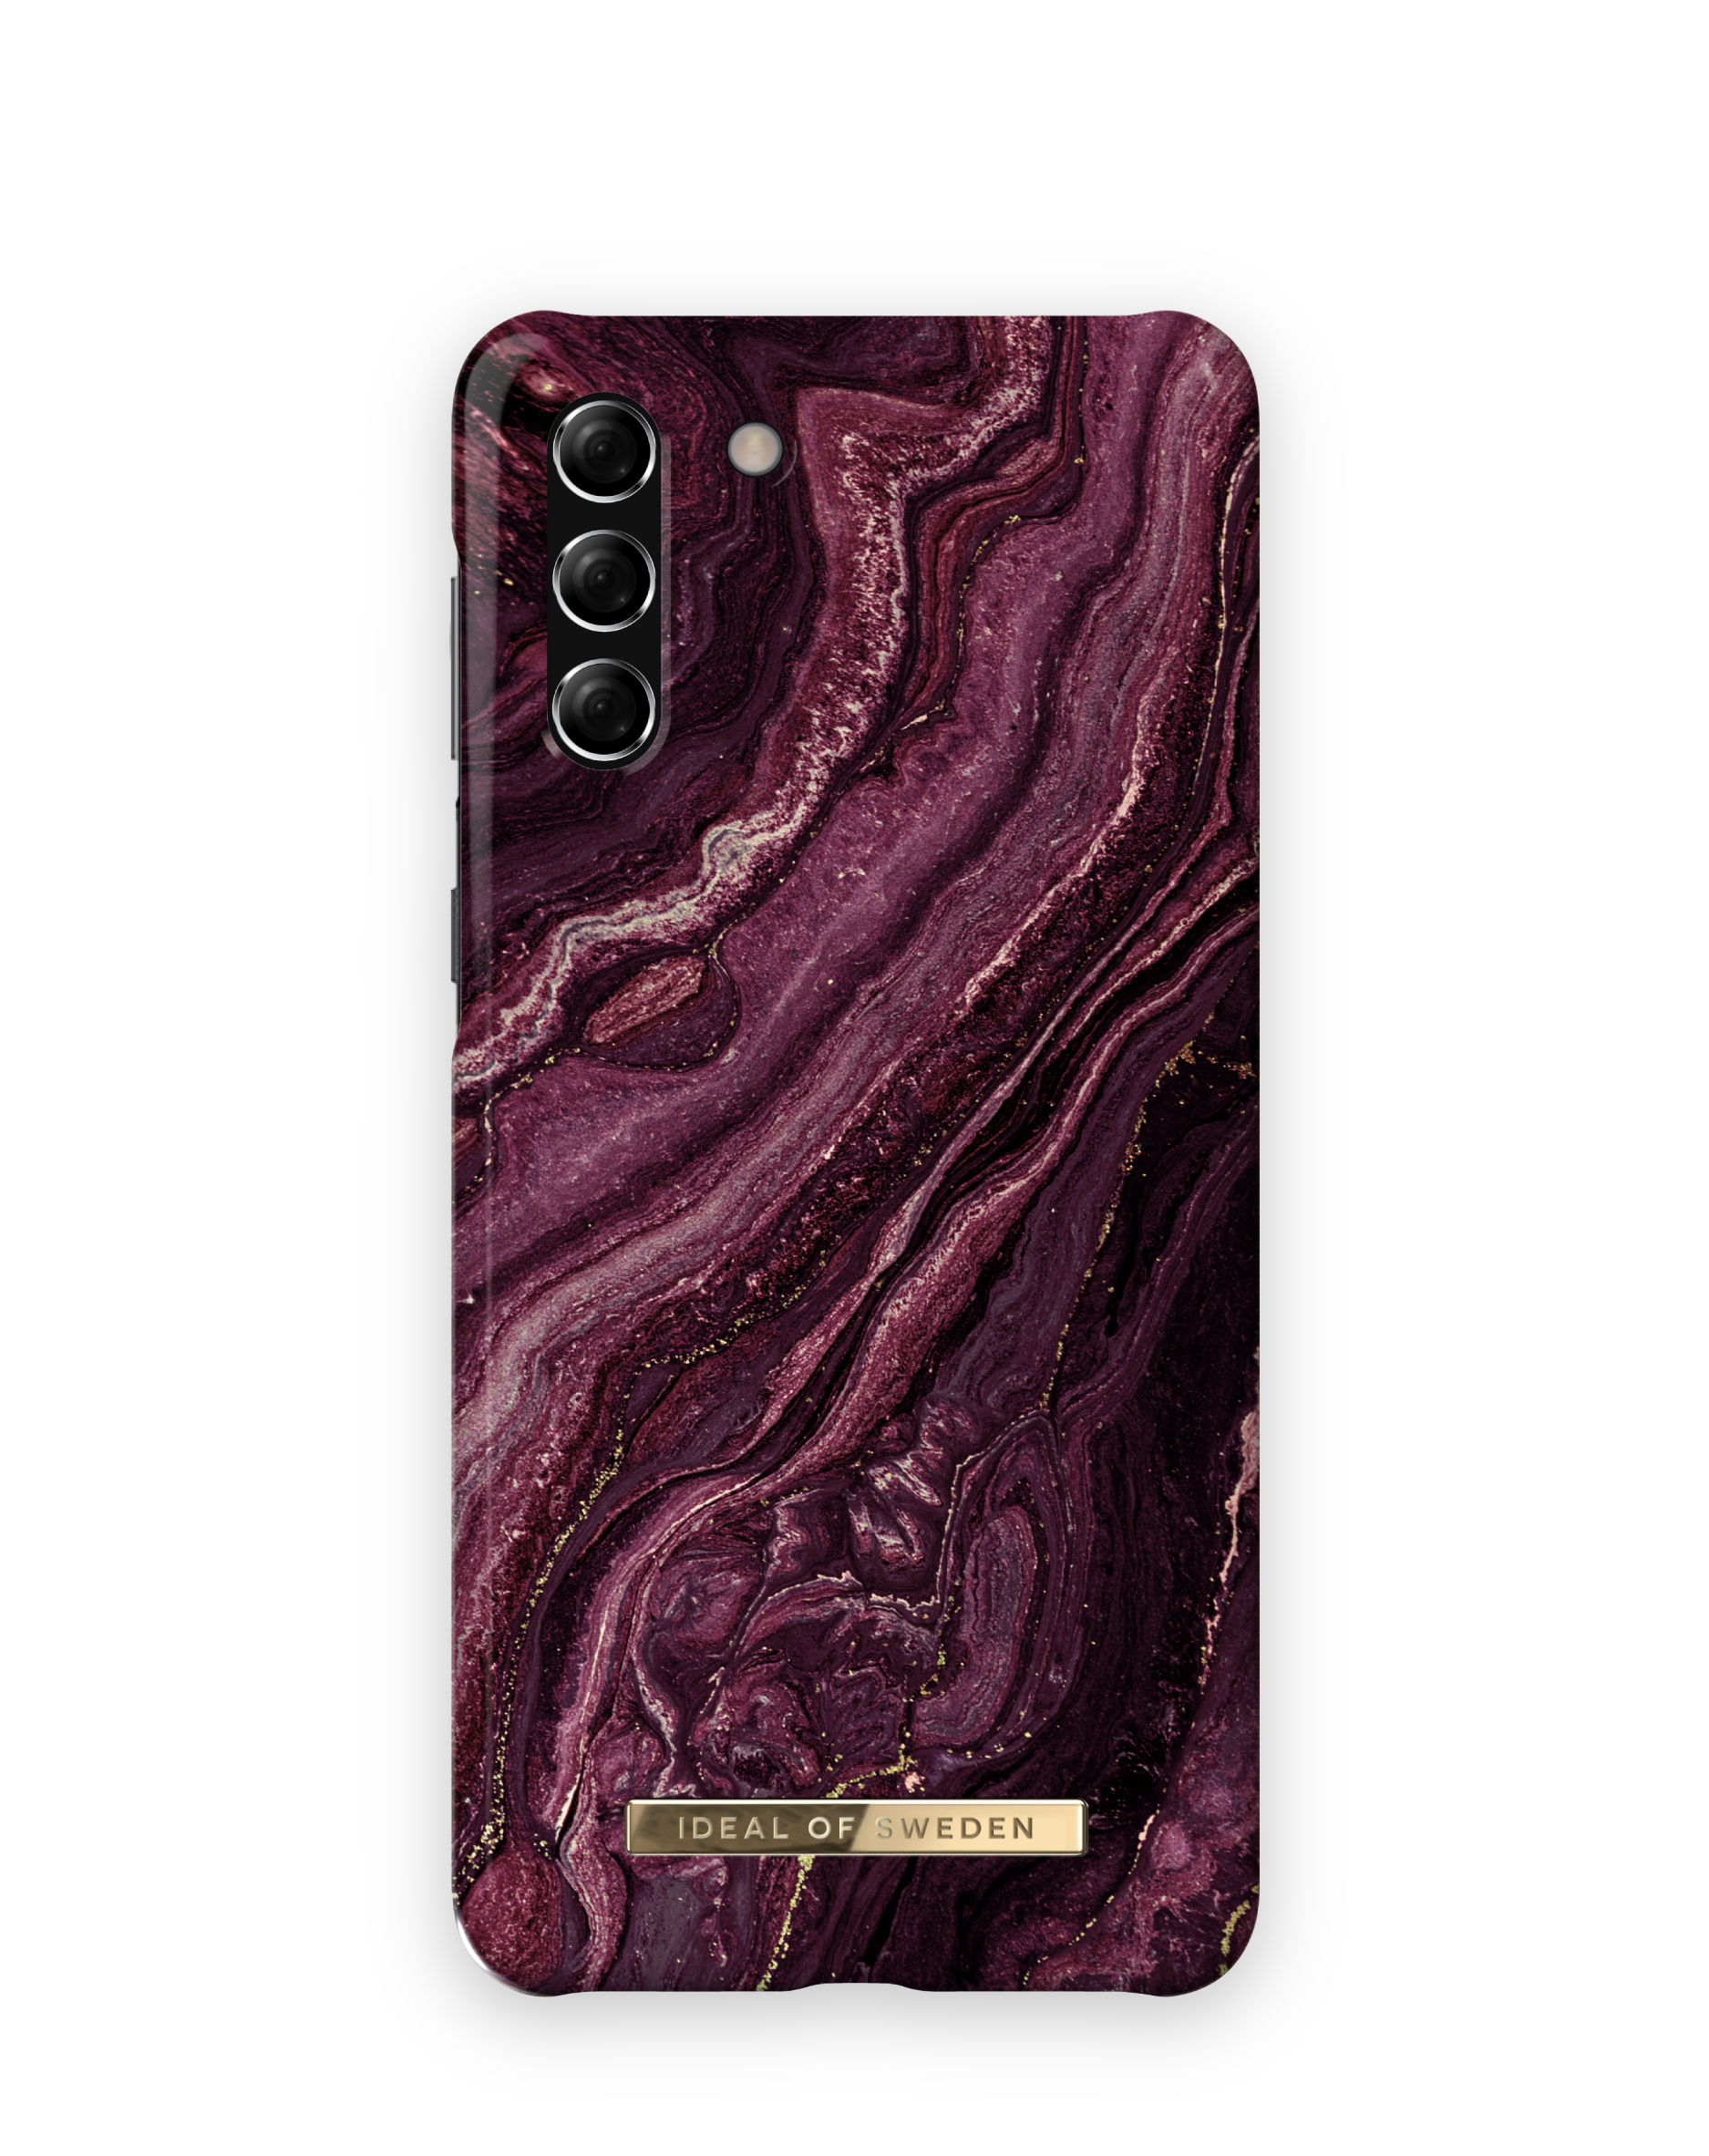 S21+, Plum Samsung, IDEAL OF Golden Galaxy Backcover, IDFCAW20-S21P-232, SWEDEN